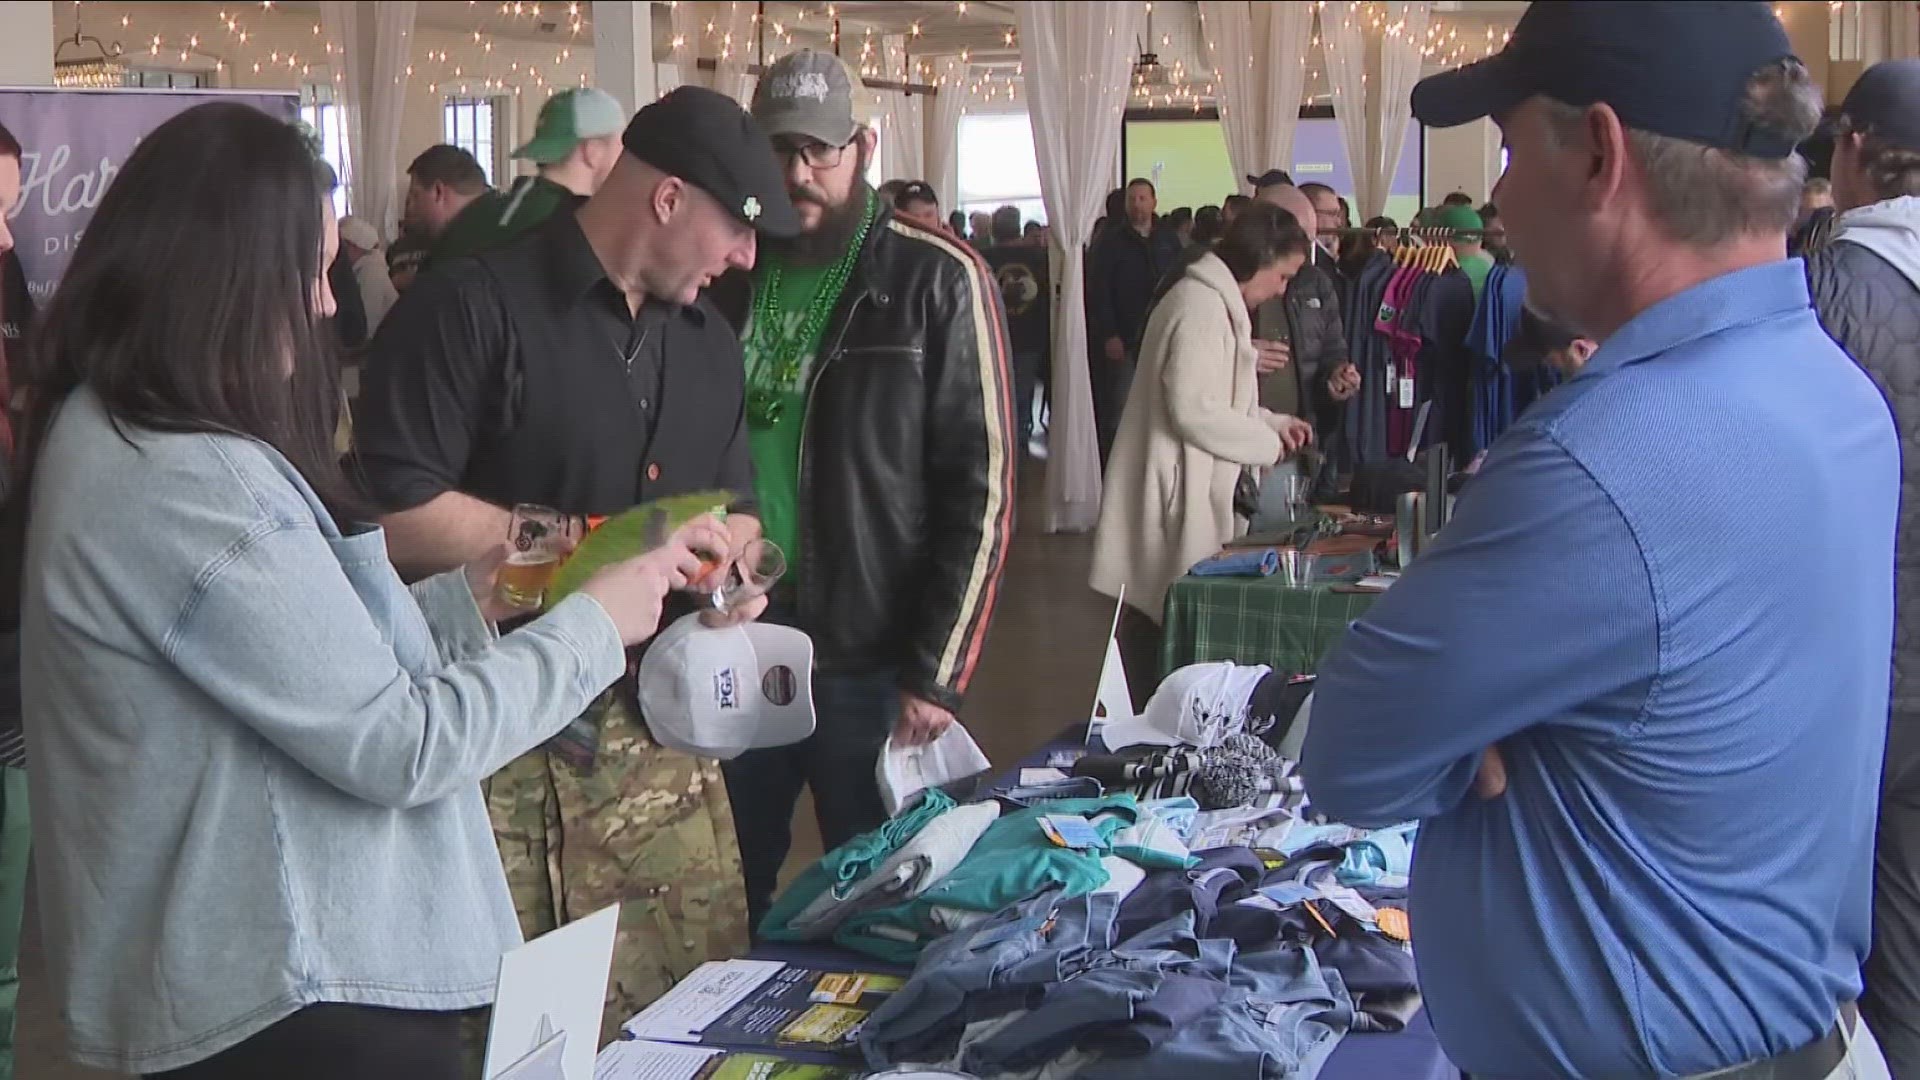 The Golf Buffalo Expo attracted enthusiasts, vendors and brand representatives to Resurgence Brewing Co. on Sunday.